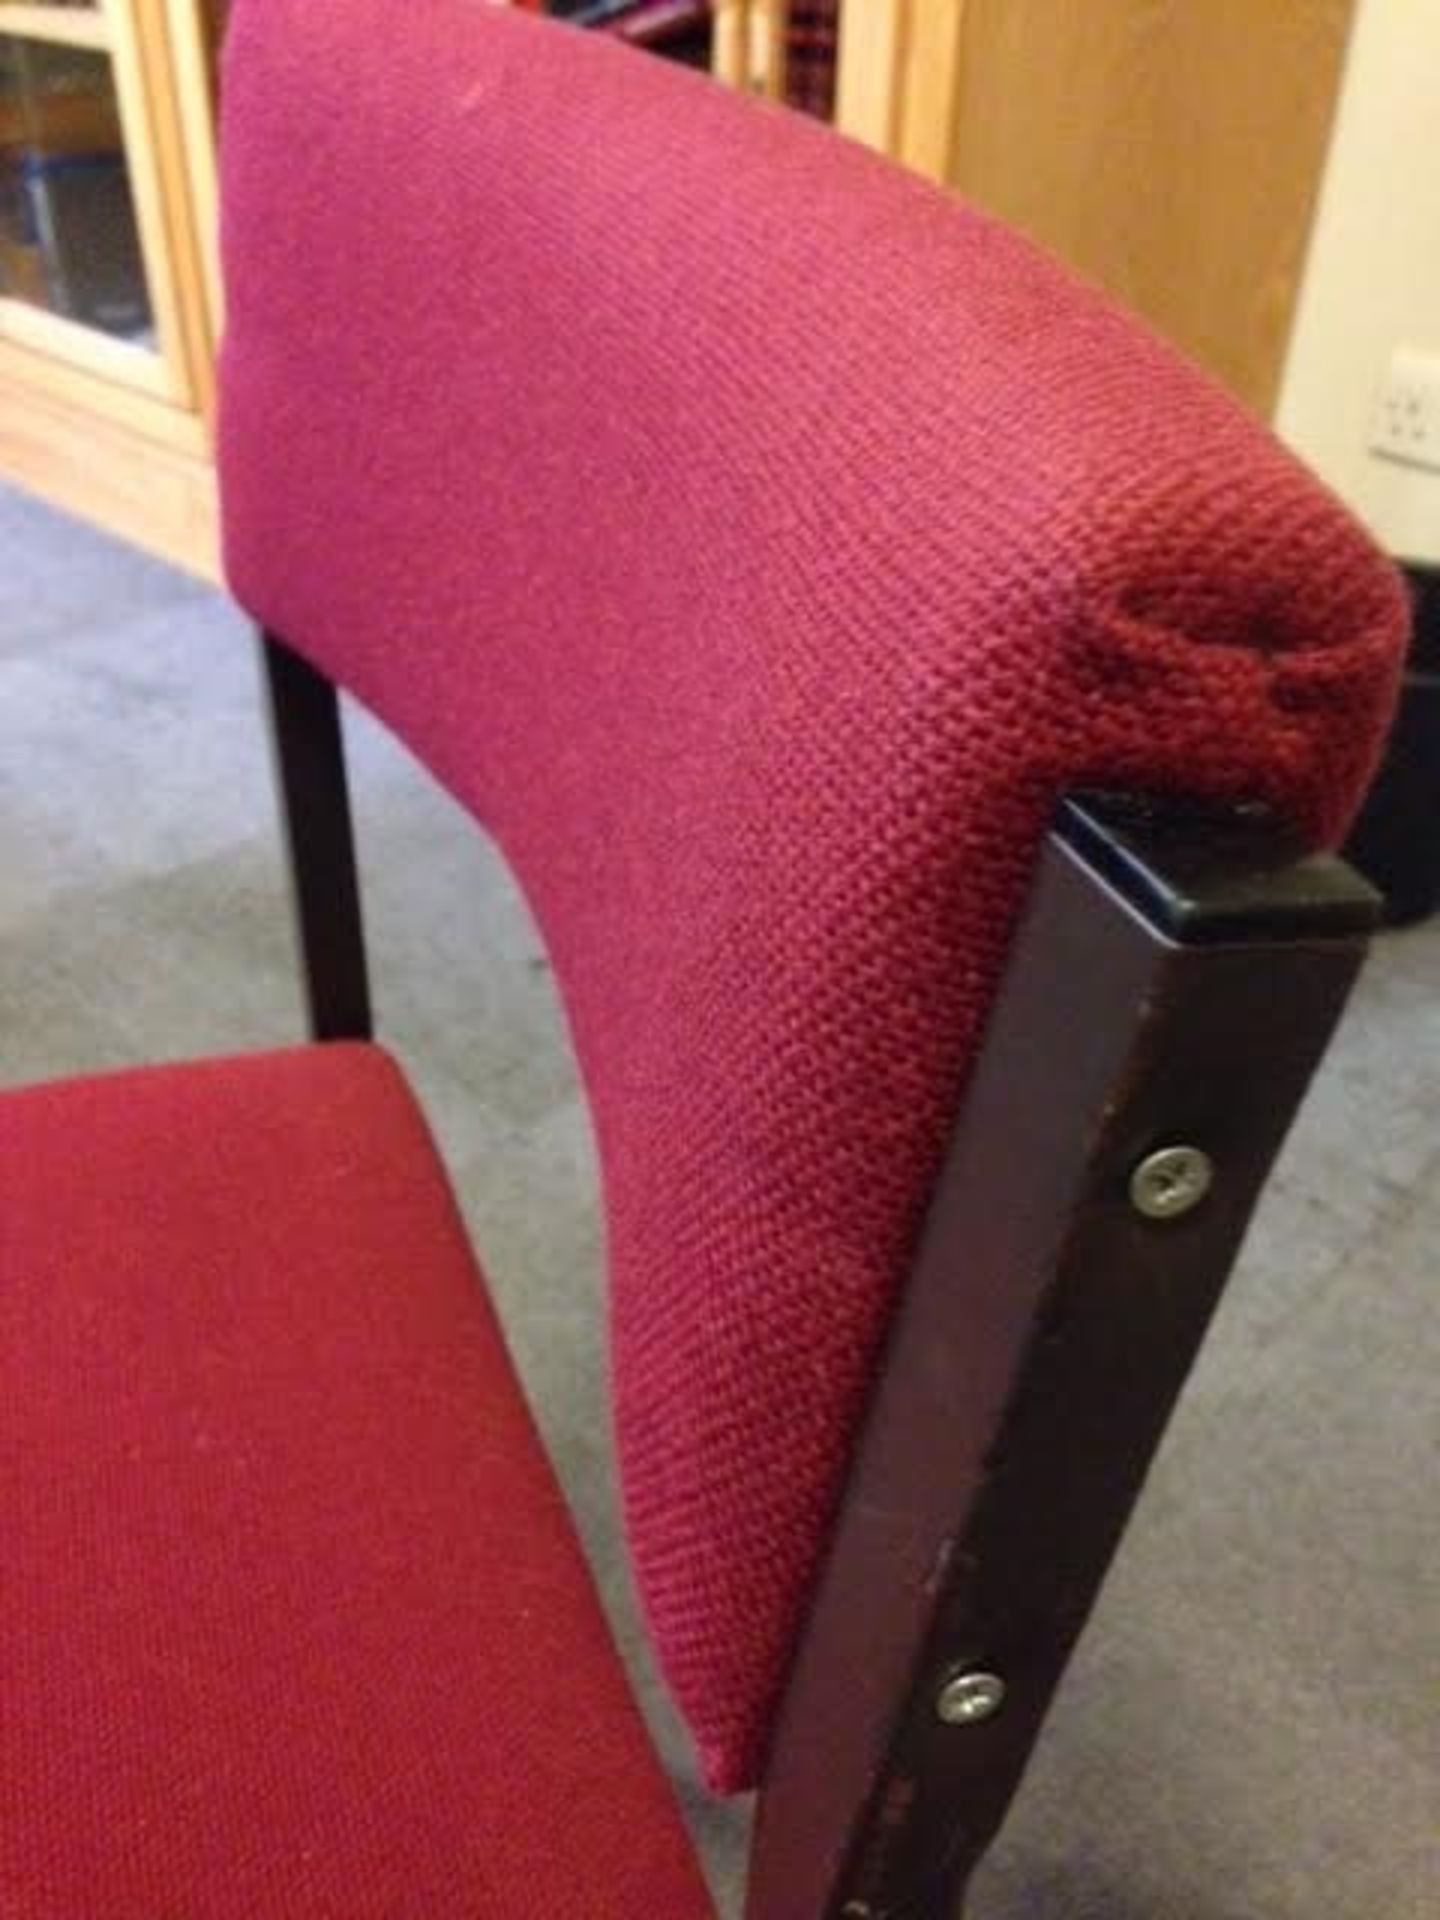 10 x Stacking Chairs - Burgundy Fabric - All In Good Condition - General Purpose Stacking Chairs For - Image 5 of 6